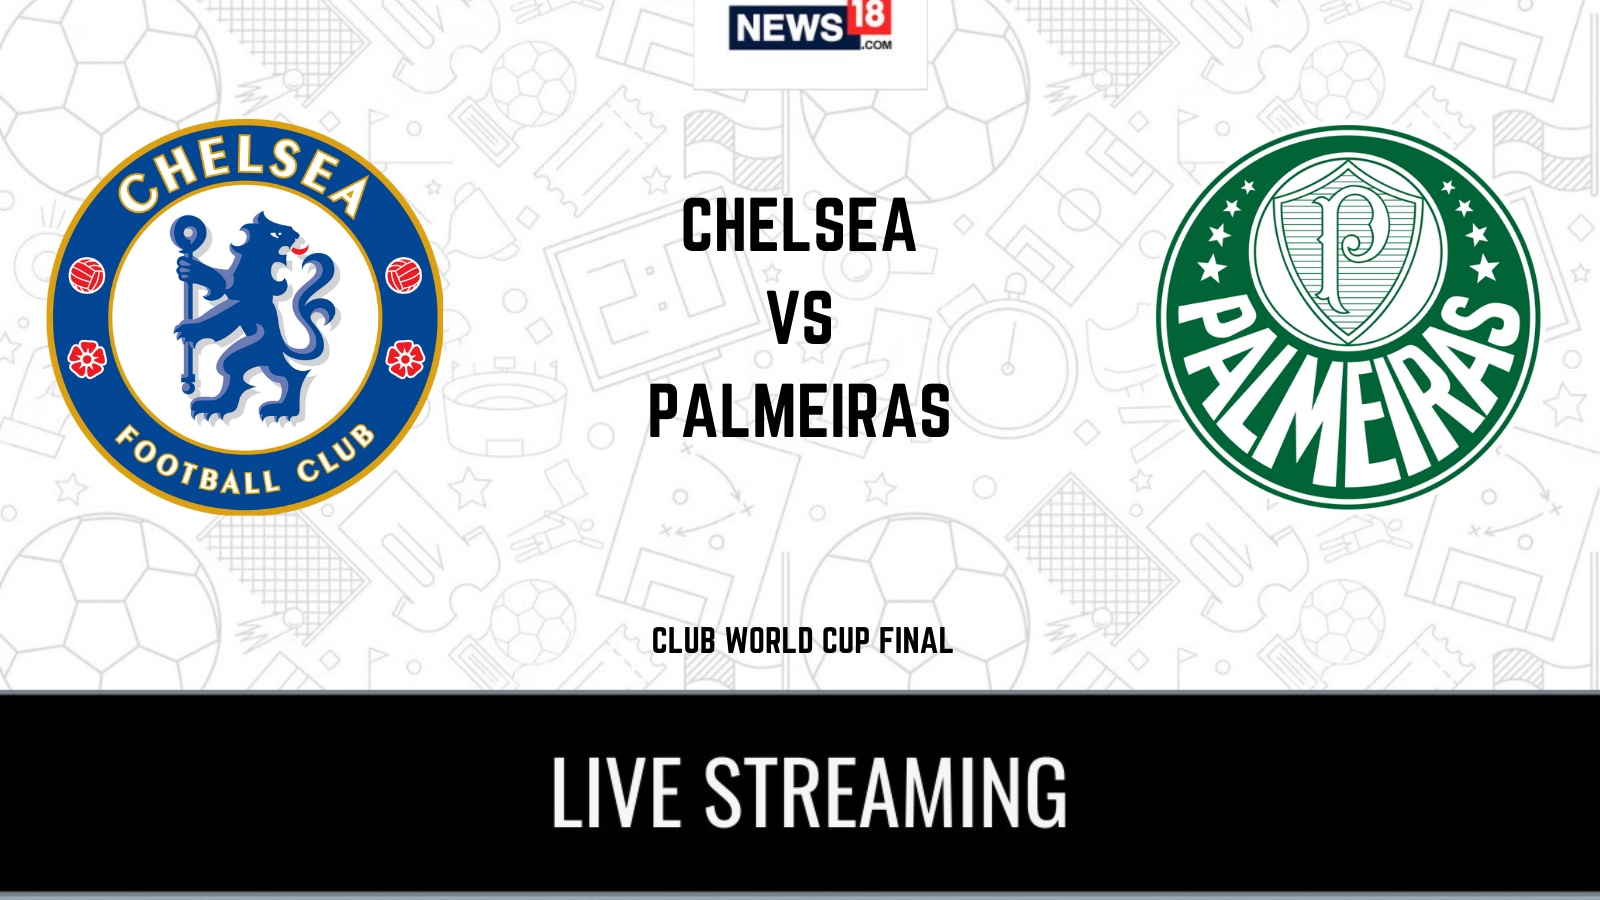 FIFA Club World Cup Final Chelsea vs Palmeiras LIVE Streaming When and Where to Watch Online, TV Telecast, Team News